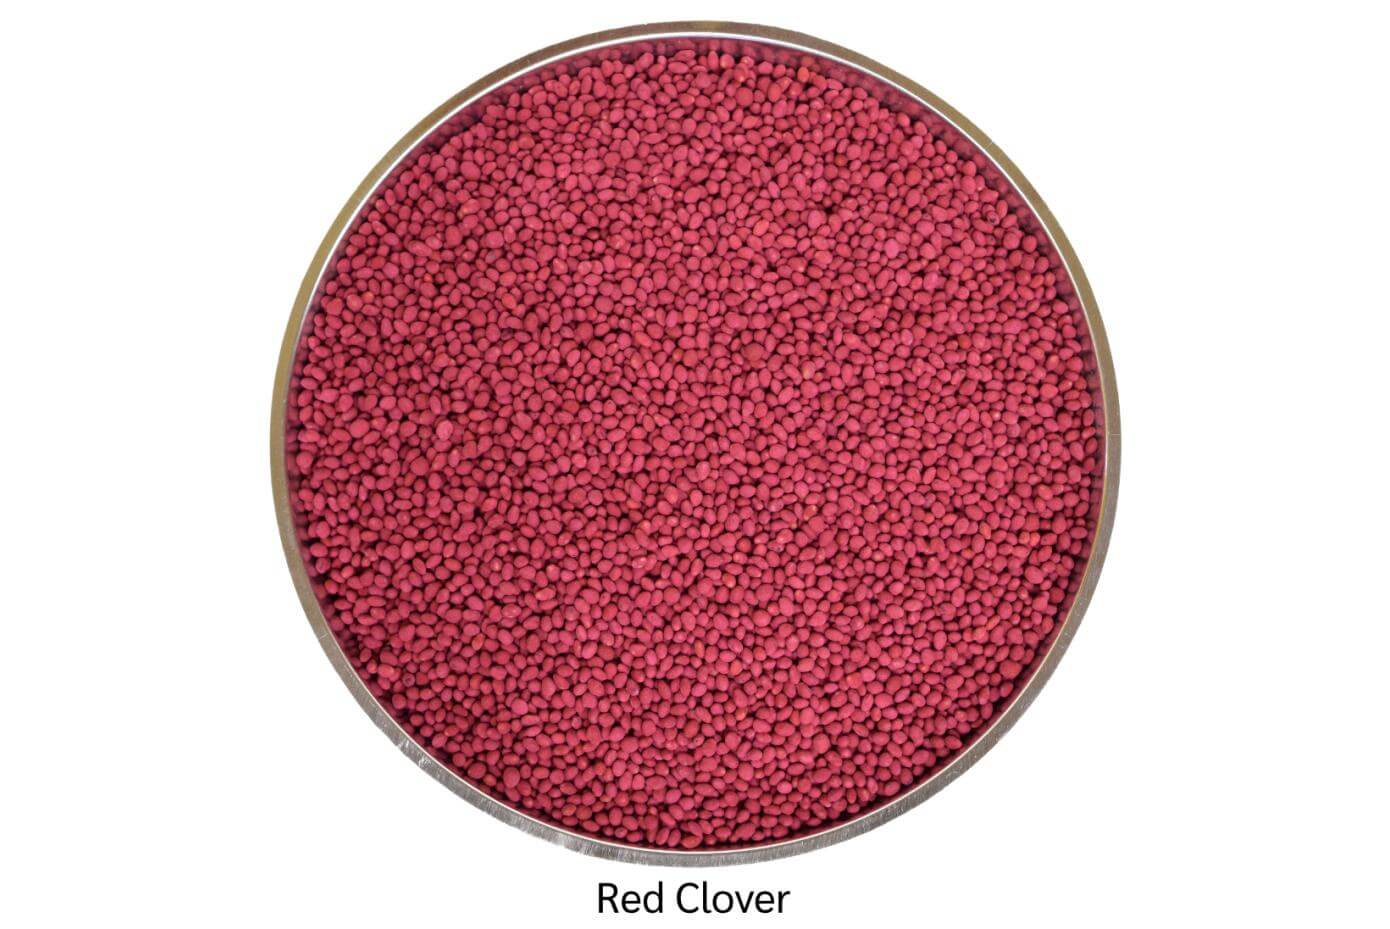 Coated red clover seed